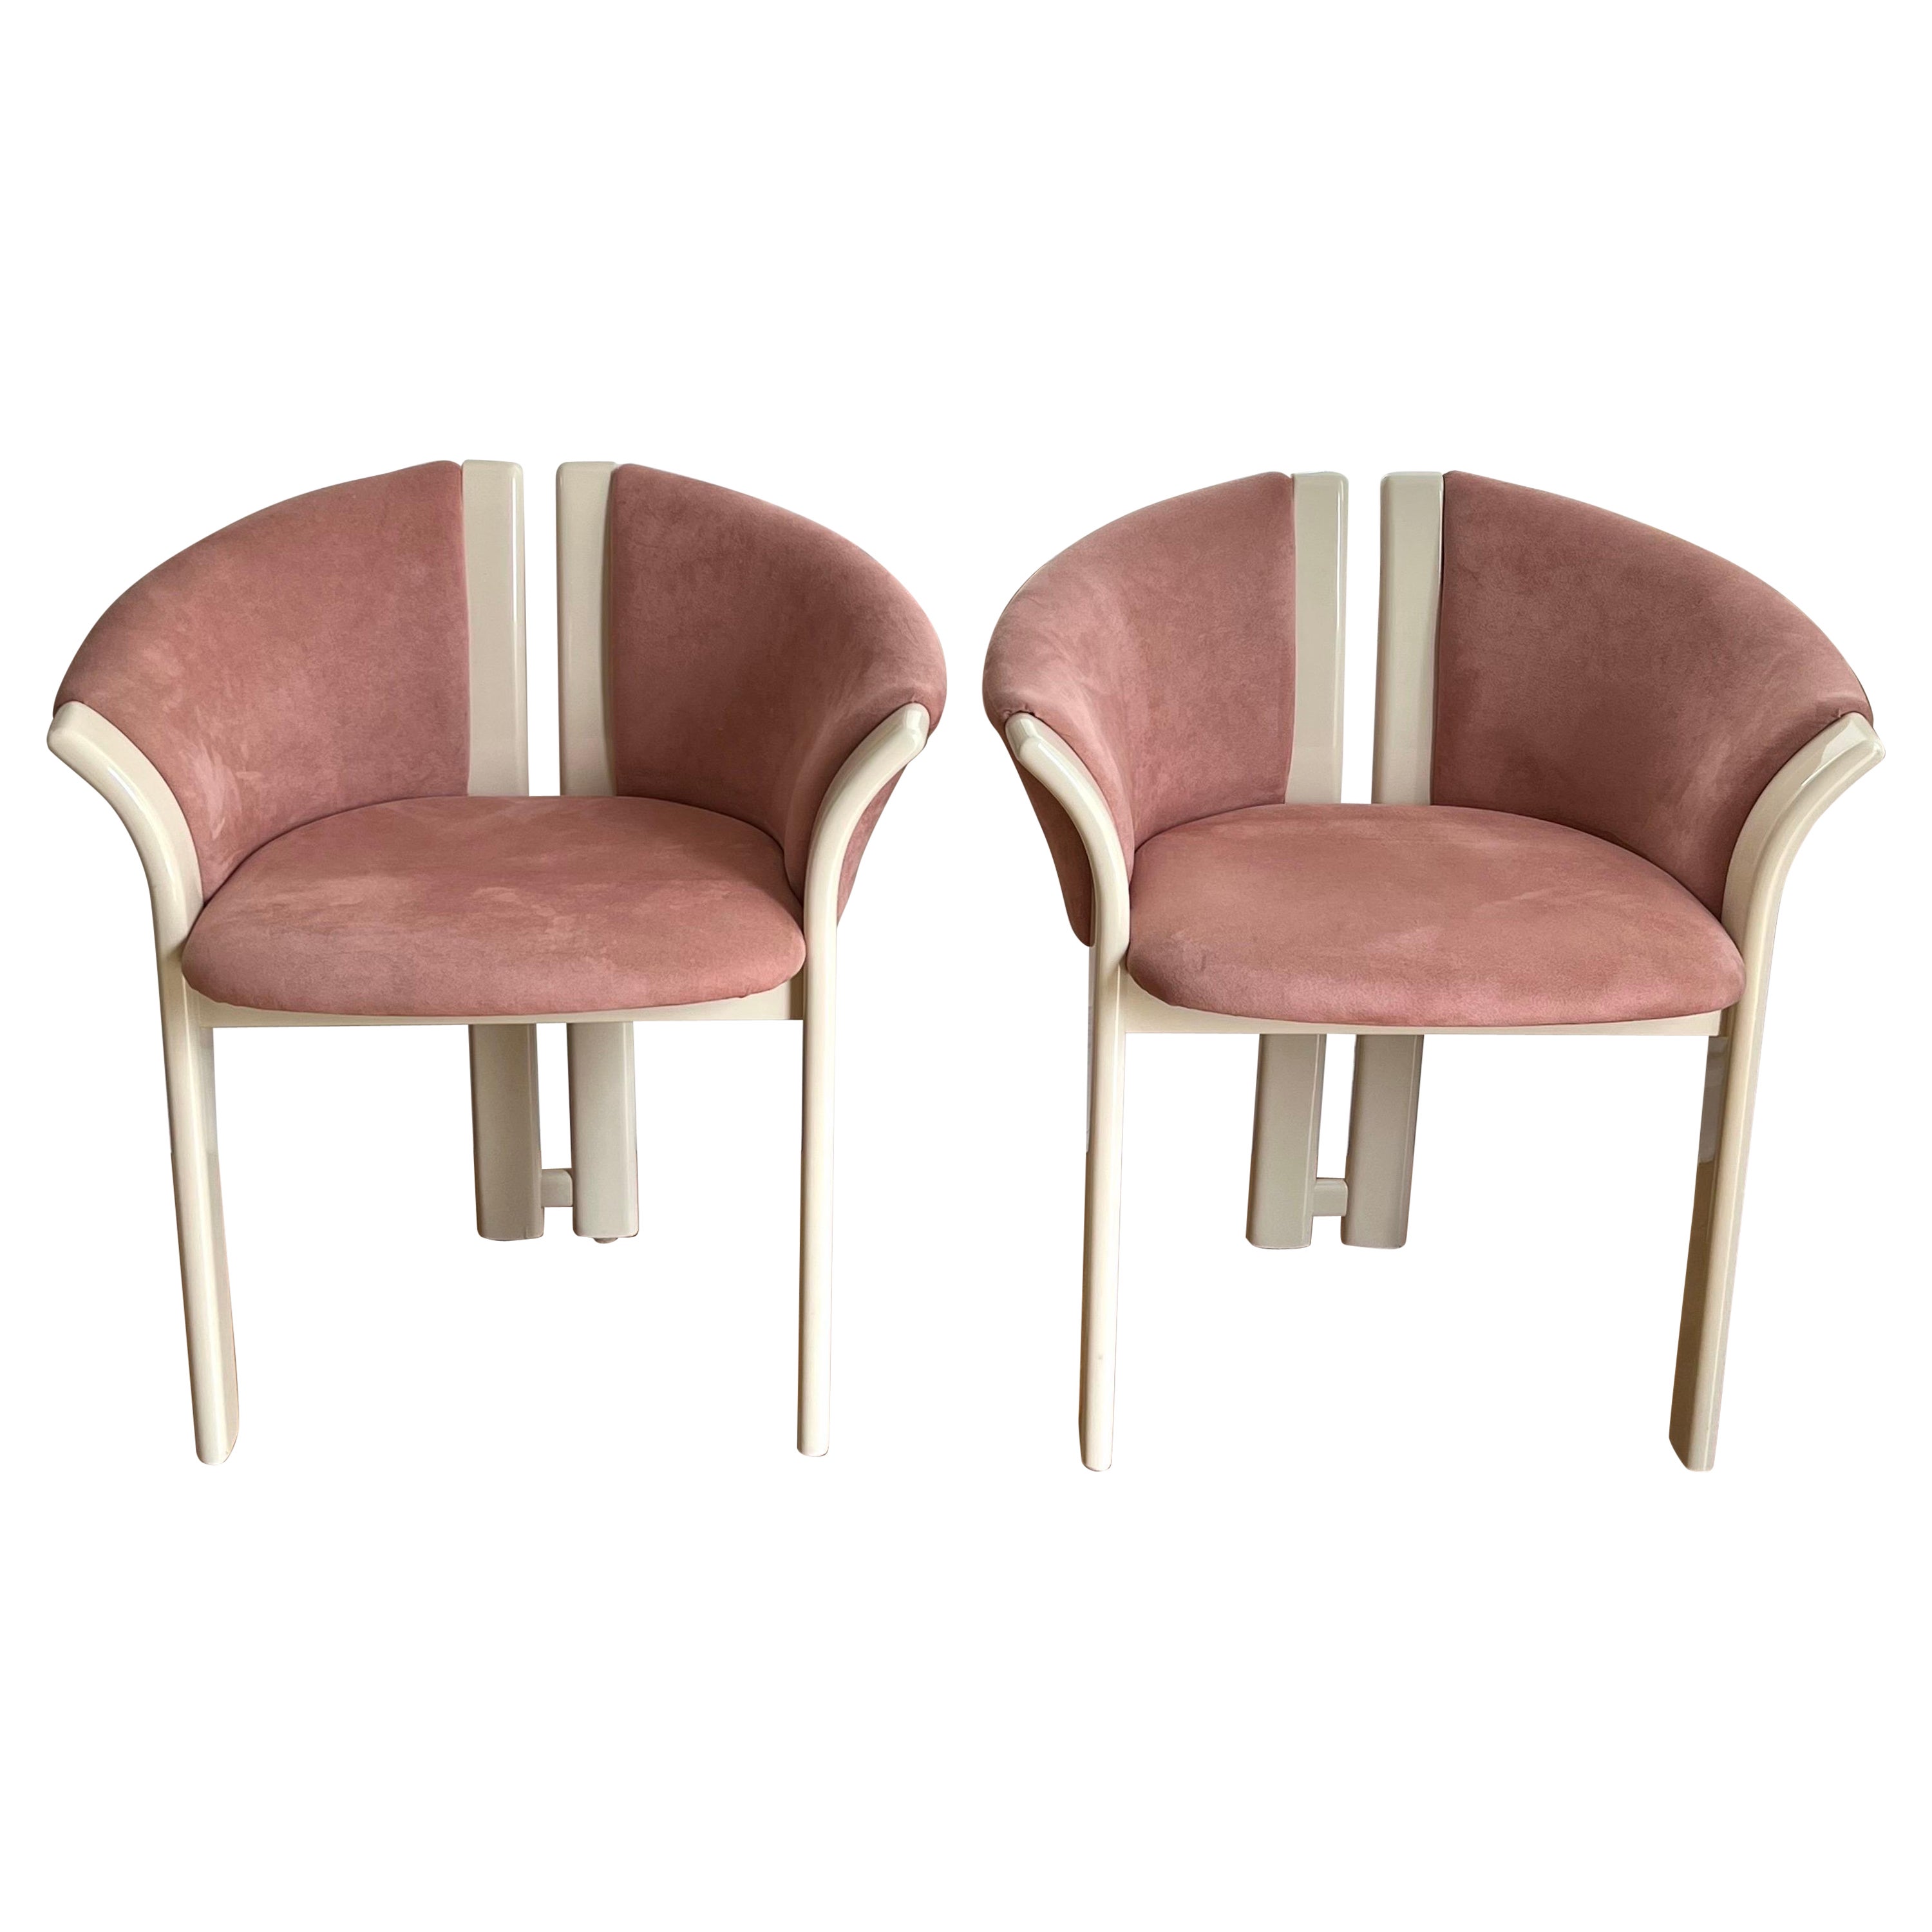 1980 Lacquer Pink Velvet Sculpture Chairs, in the style of Karl Springer For Sale